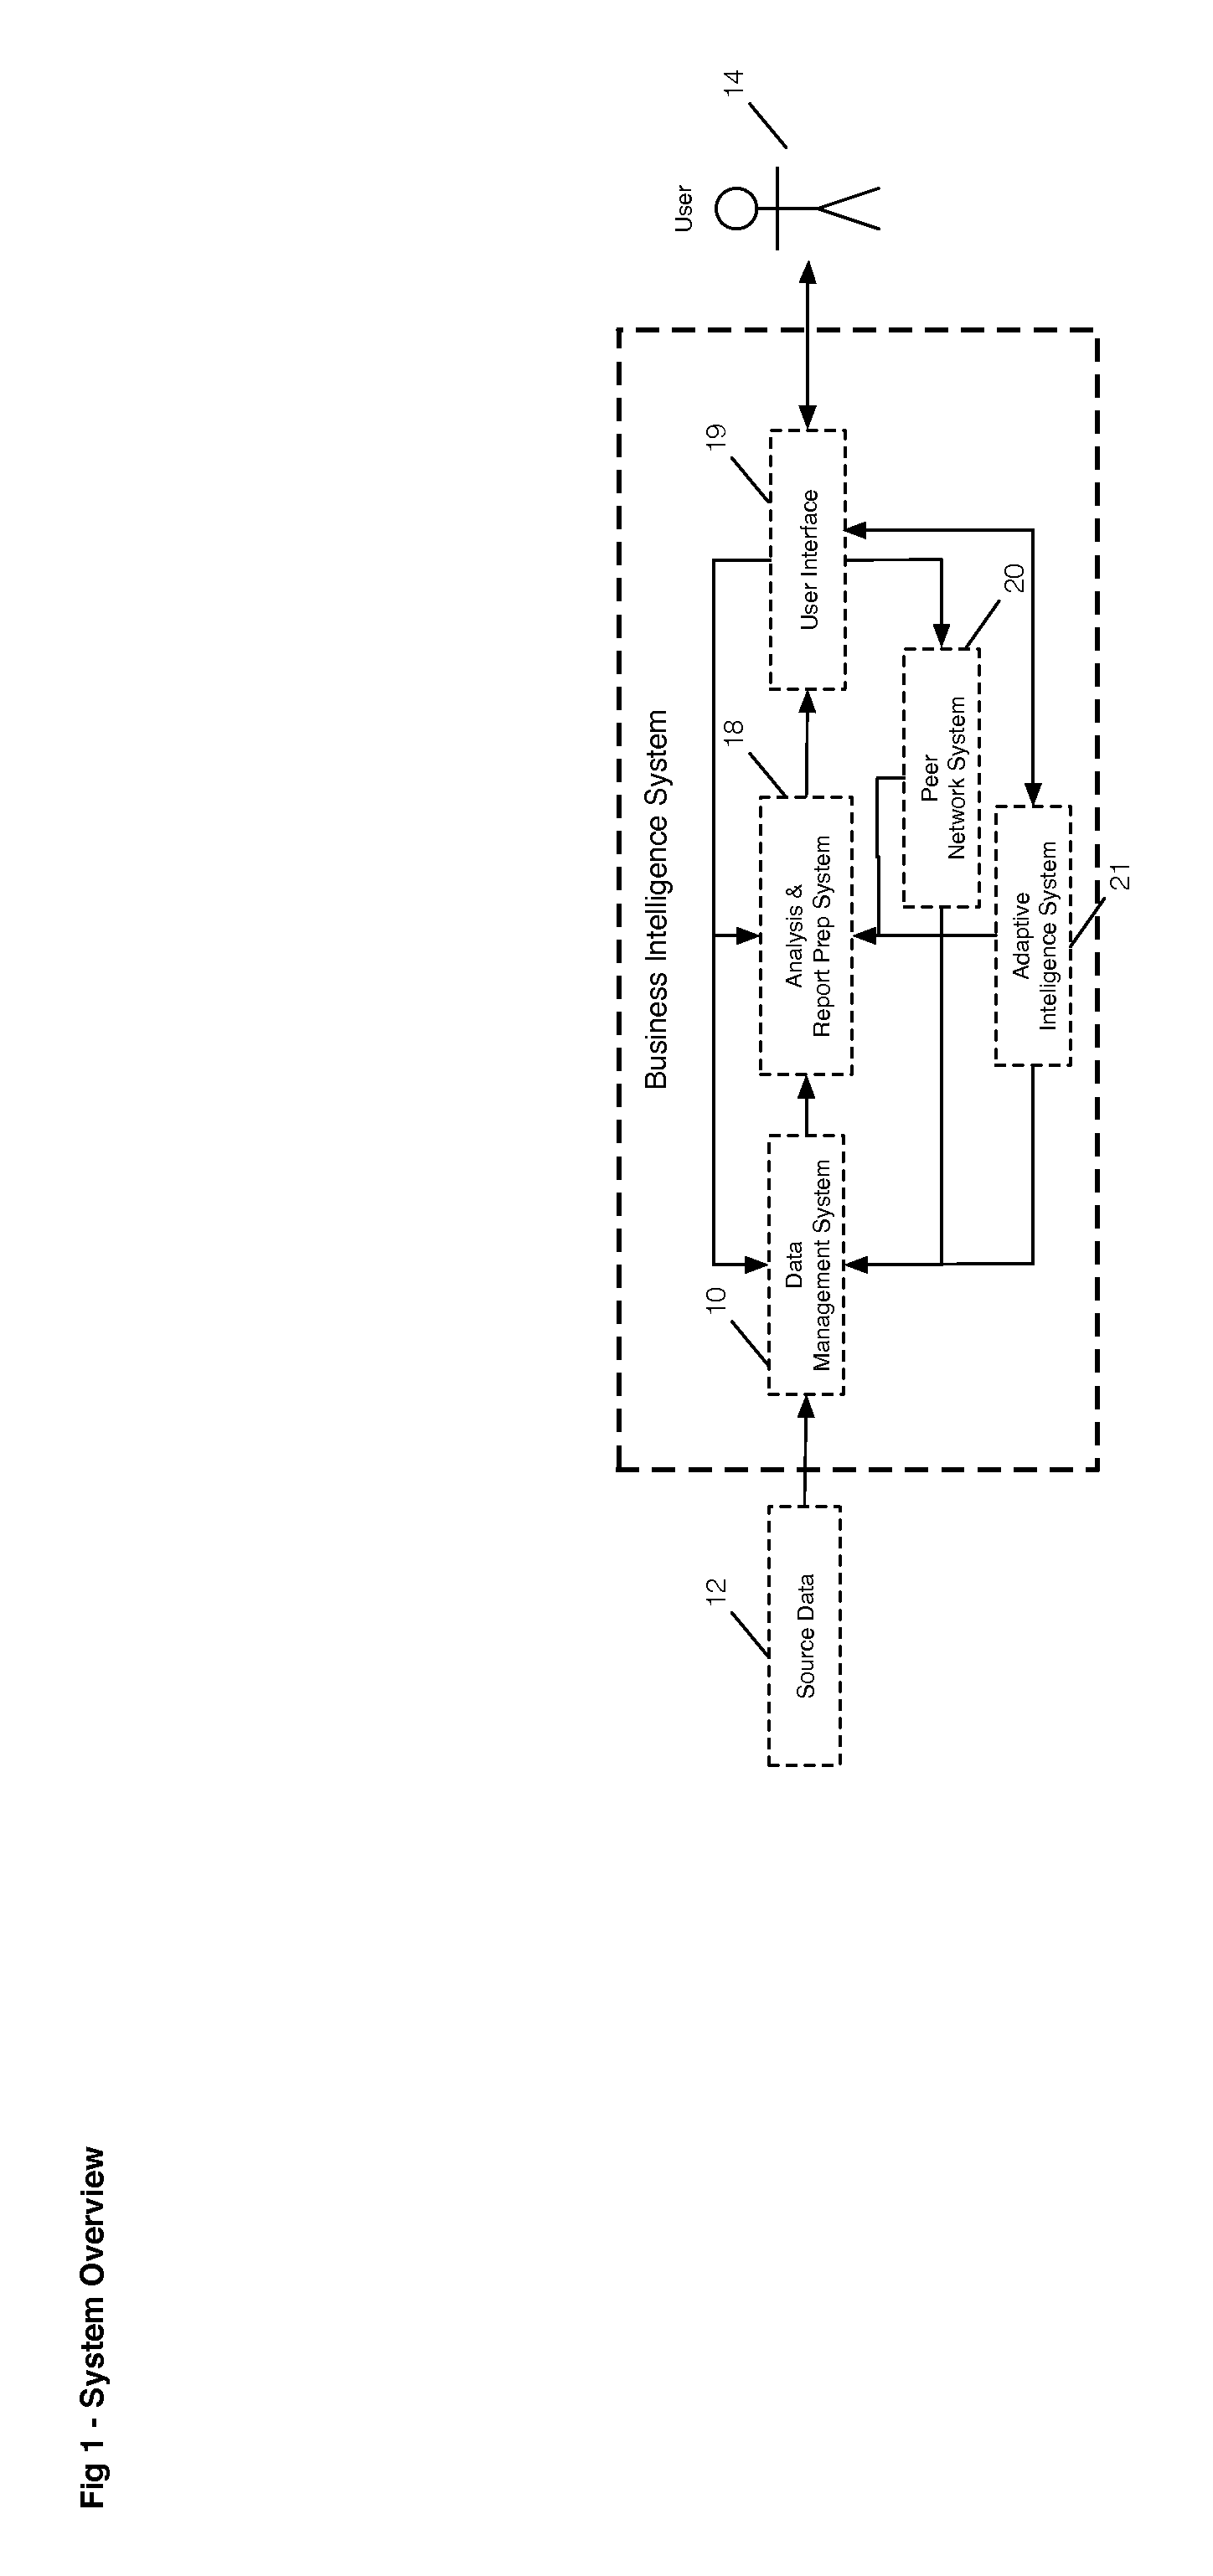 Business intelligence system and method utilizing multidimensional analysis of a plurality of transformed and scaled data streams